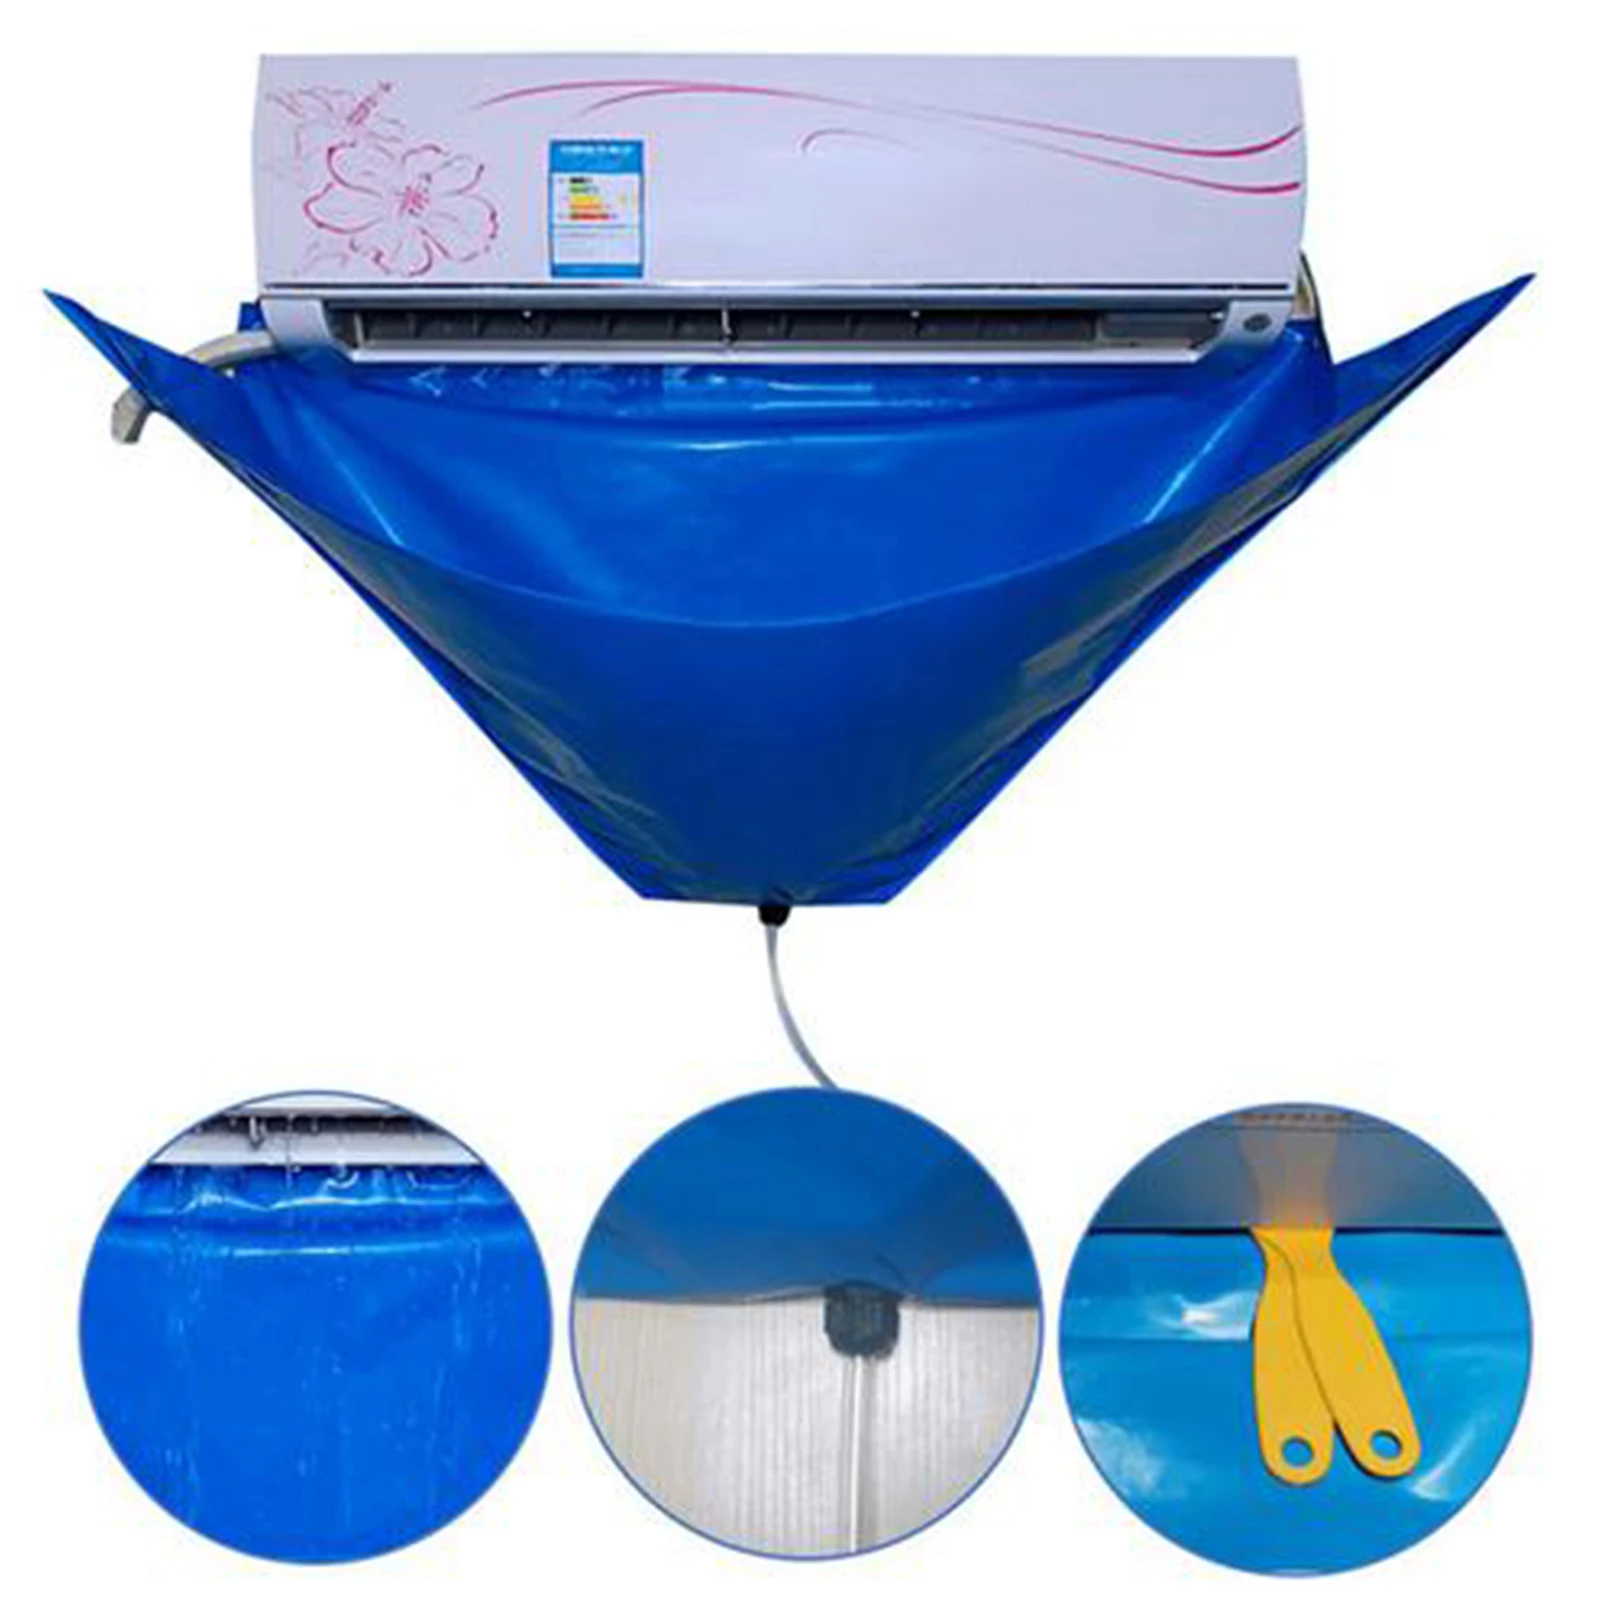 

Air Conditioner Cleaning Cover With Water Pipe Waterproof Dust Protection Cleaning Cover Bag For Air Conditioners Below 1.5P